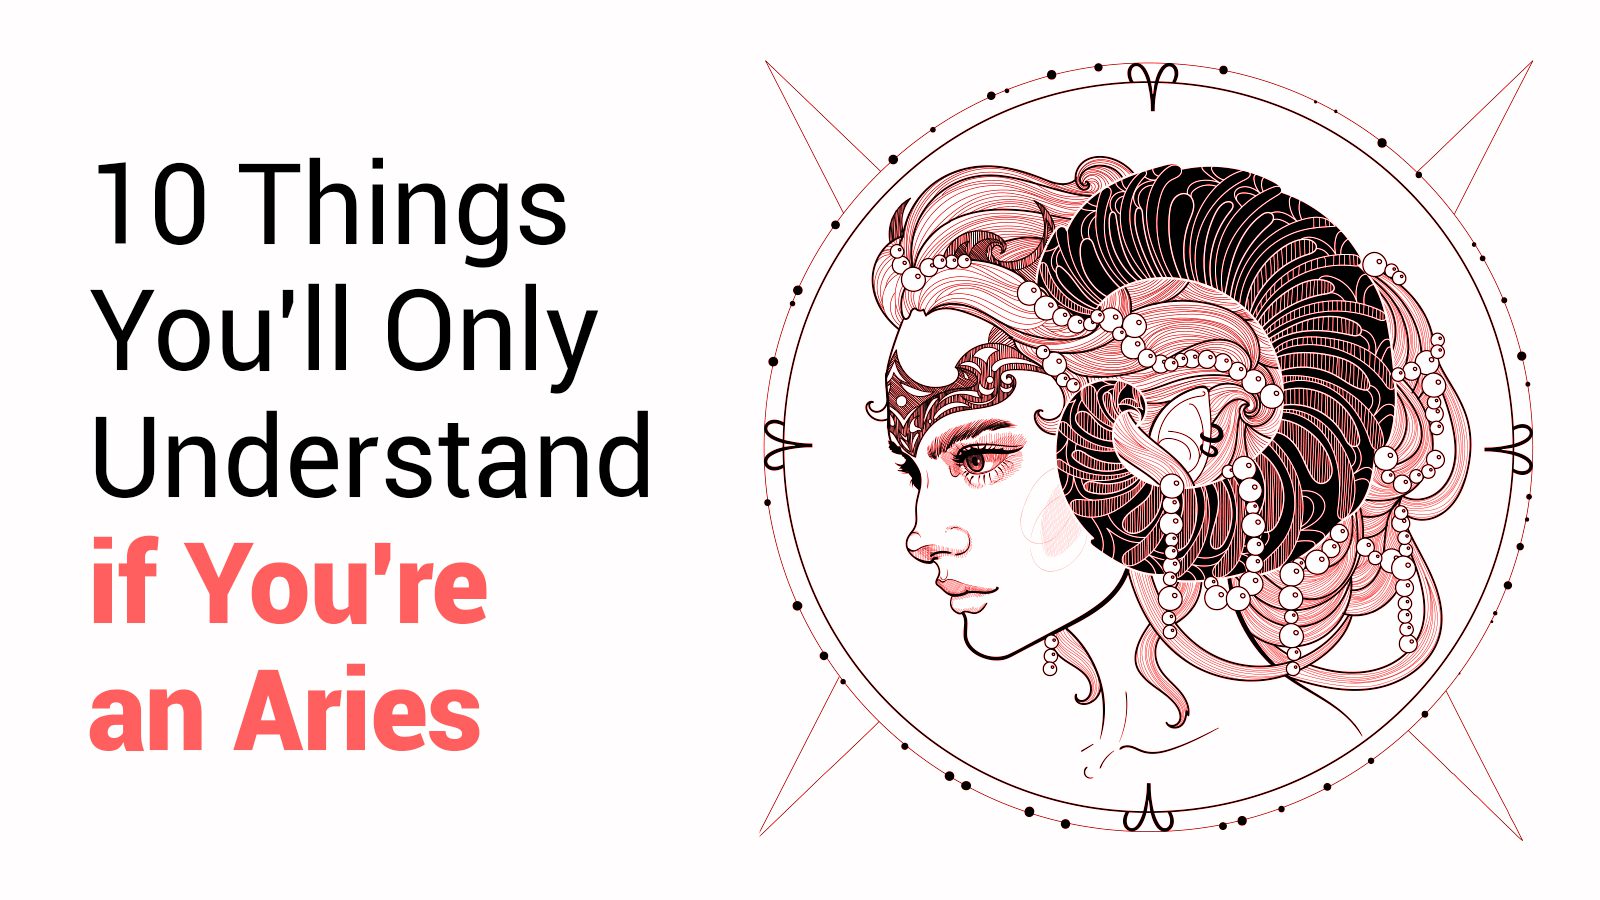 10 Things You’ll Only Understand if You’re an Aries